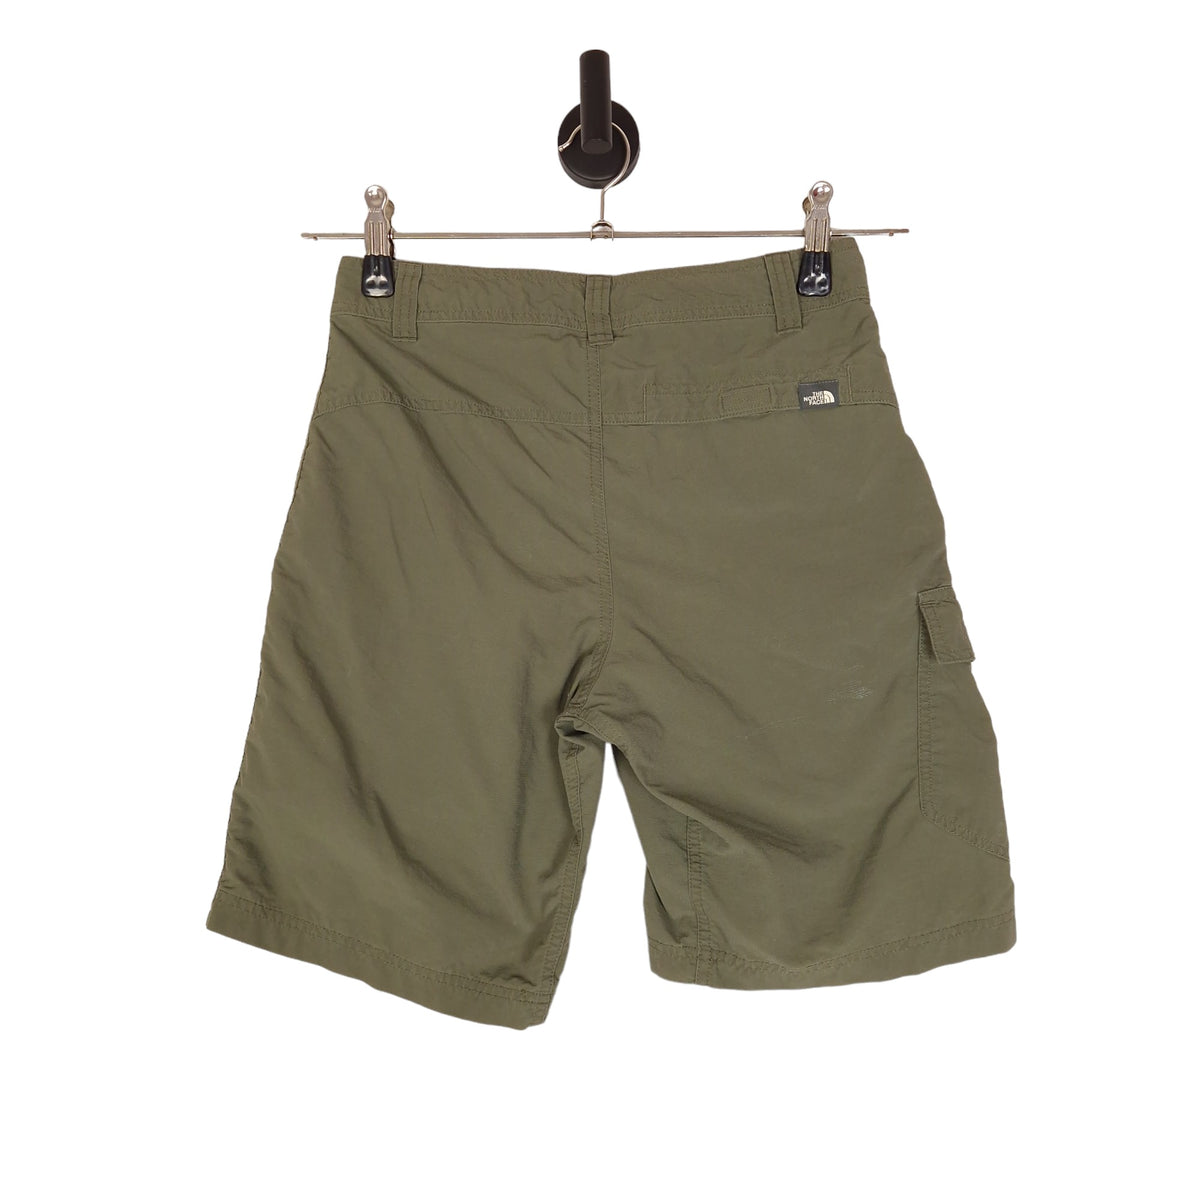 The North Face Shorts  - Size W28